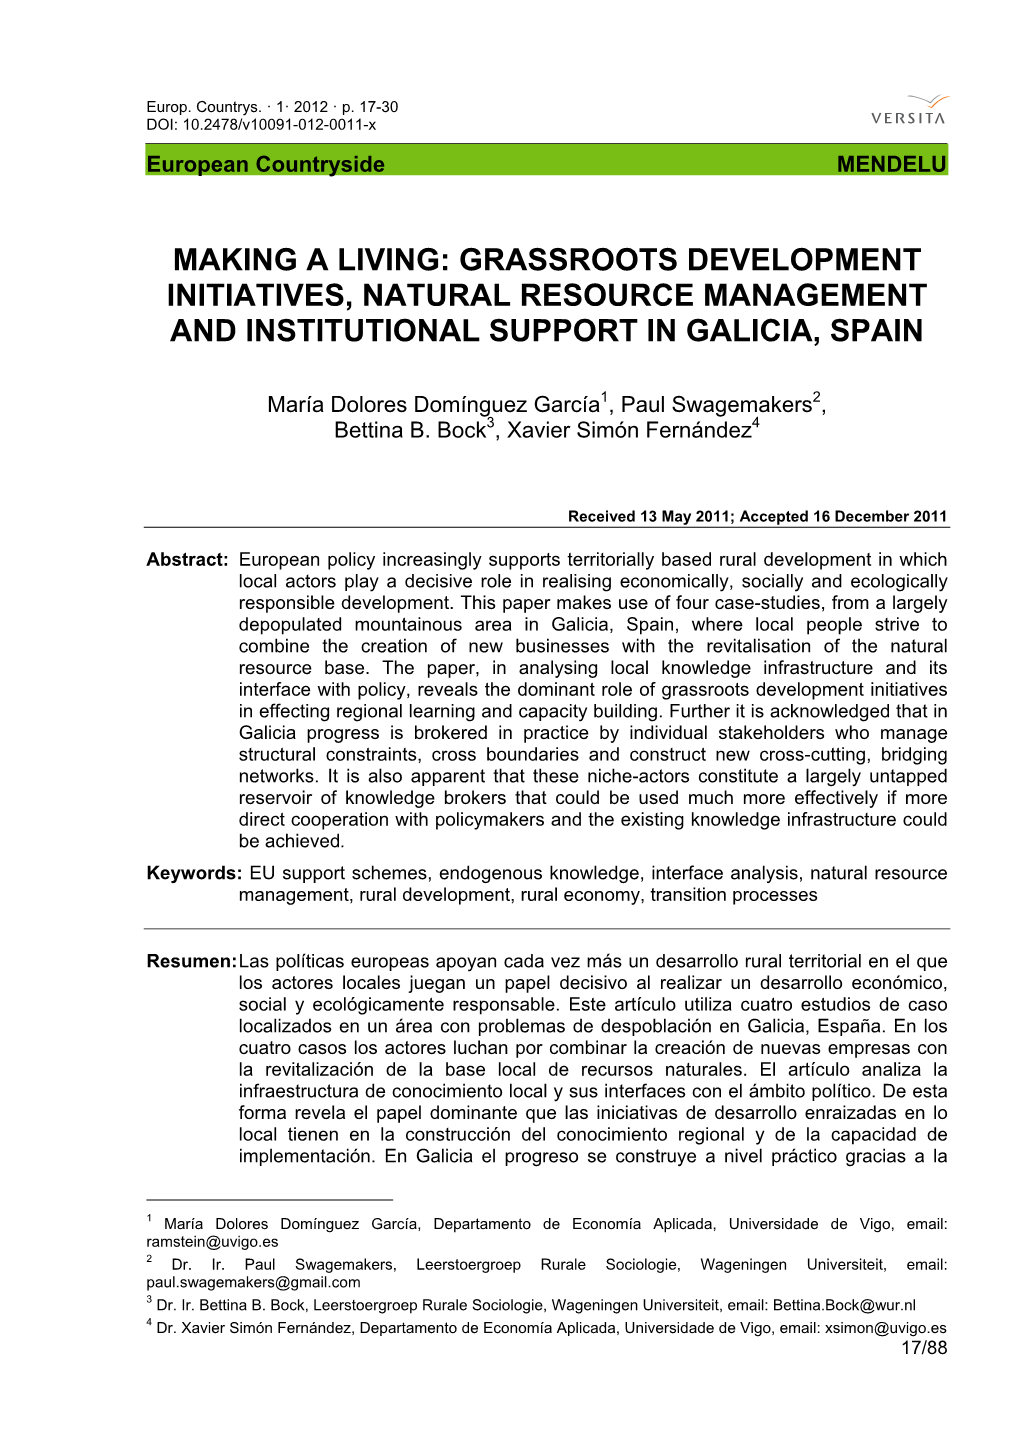 Grassroots Development Initiatives, Natural Resource Management and Institutional Support in Galicia, Spain